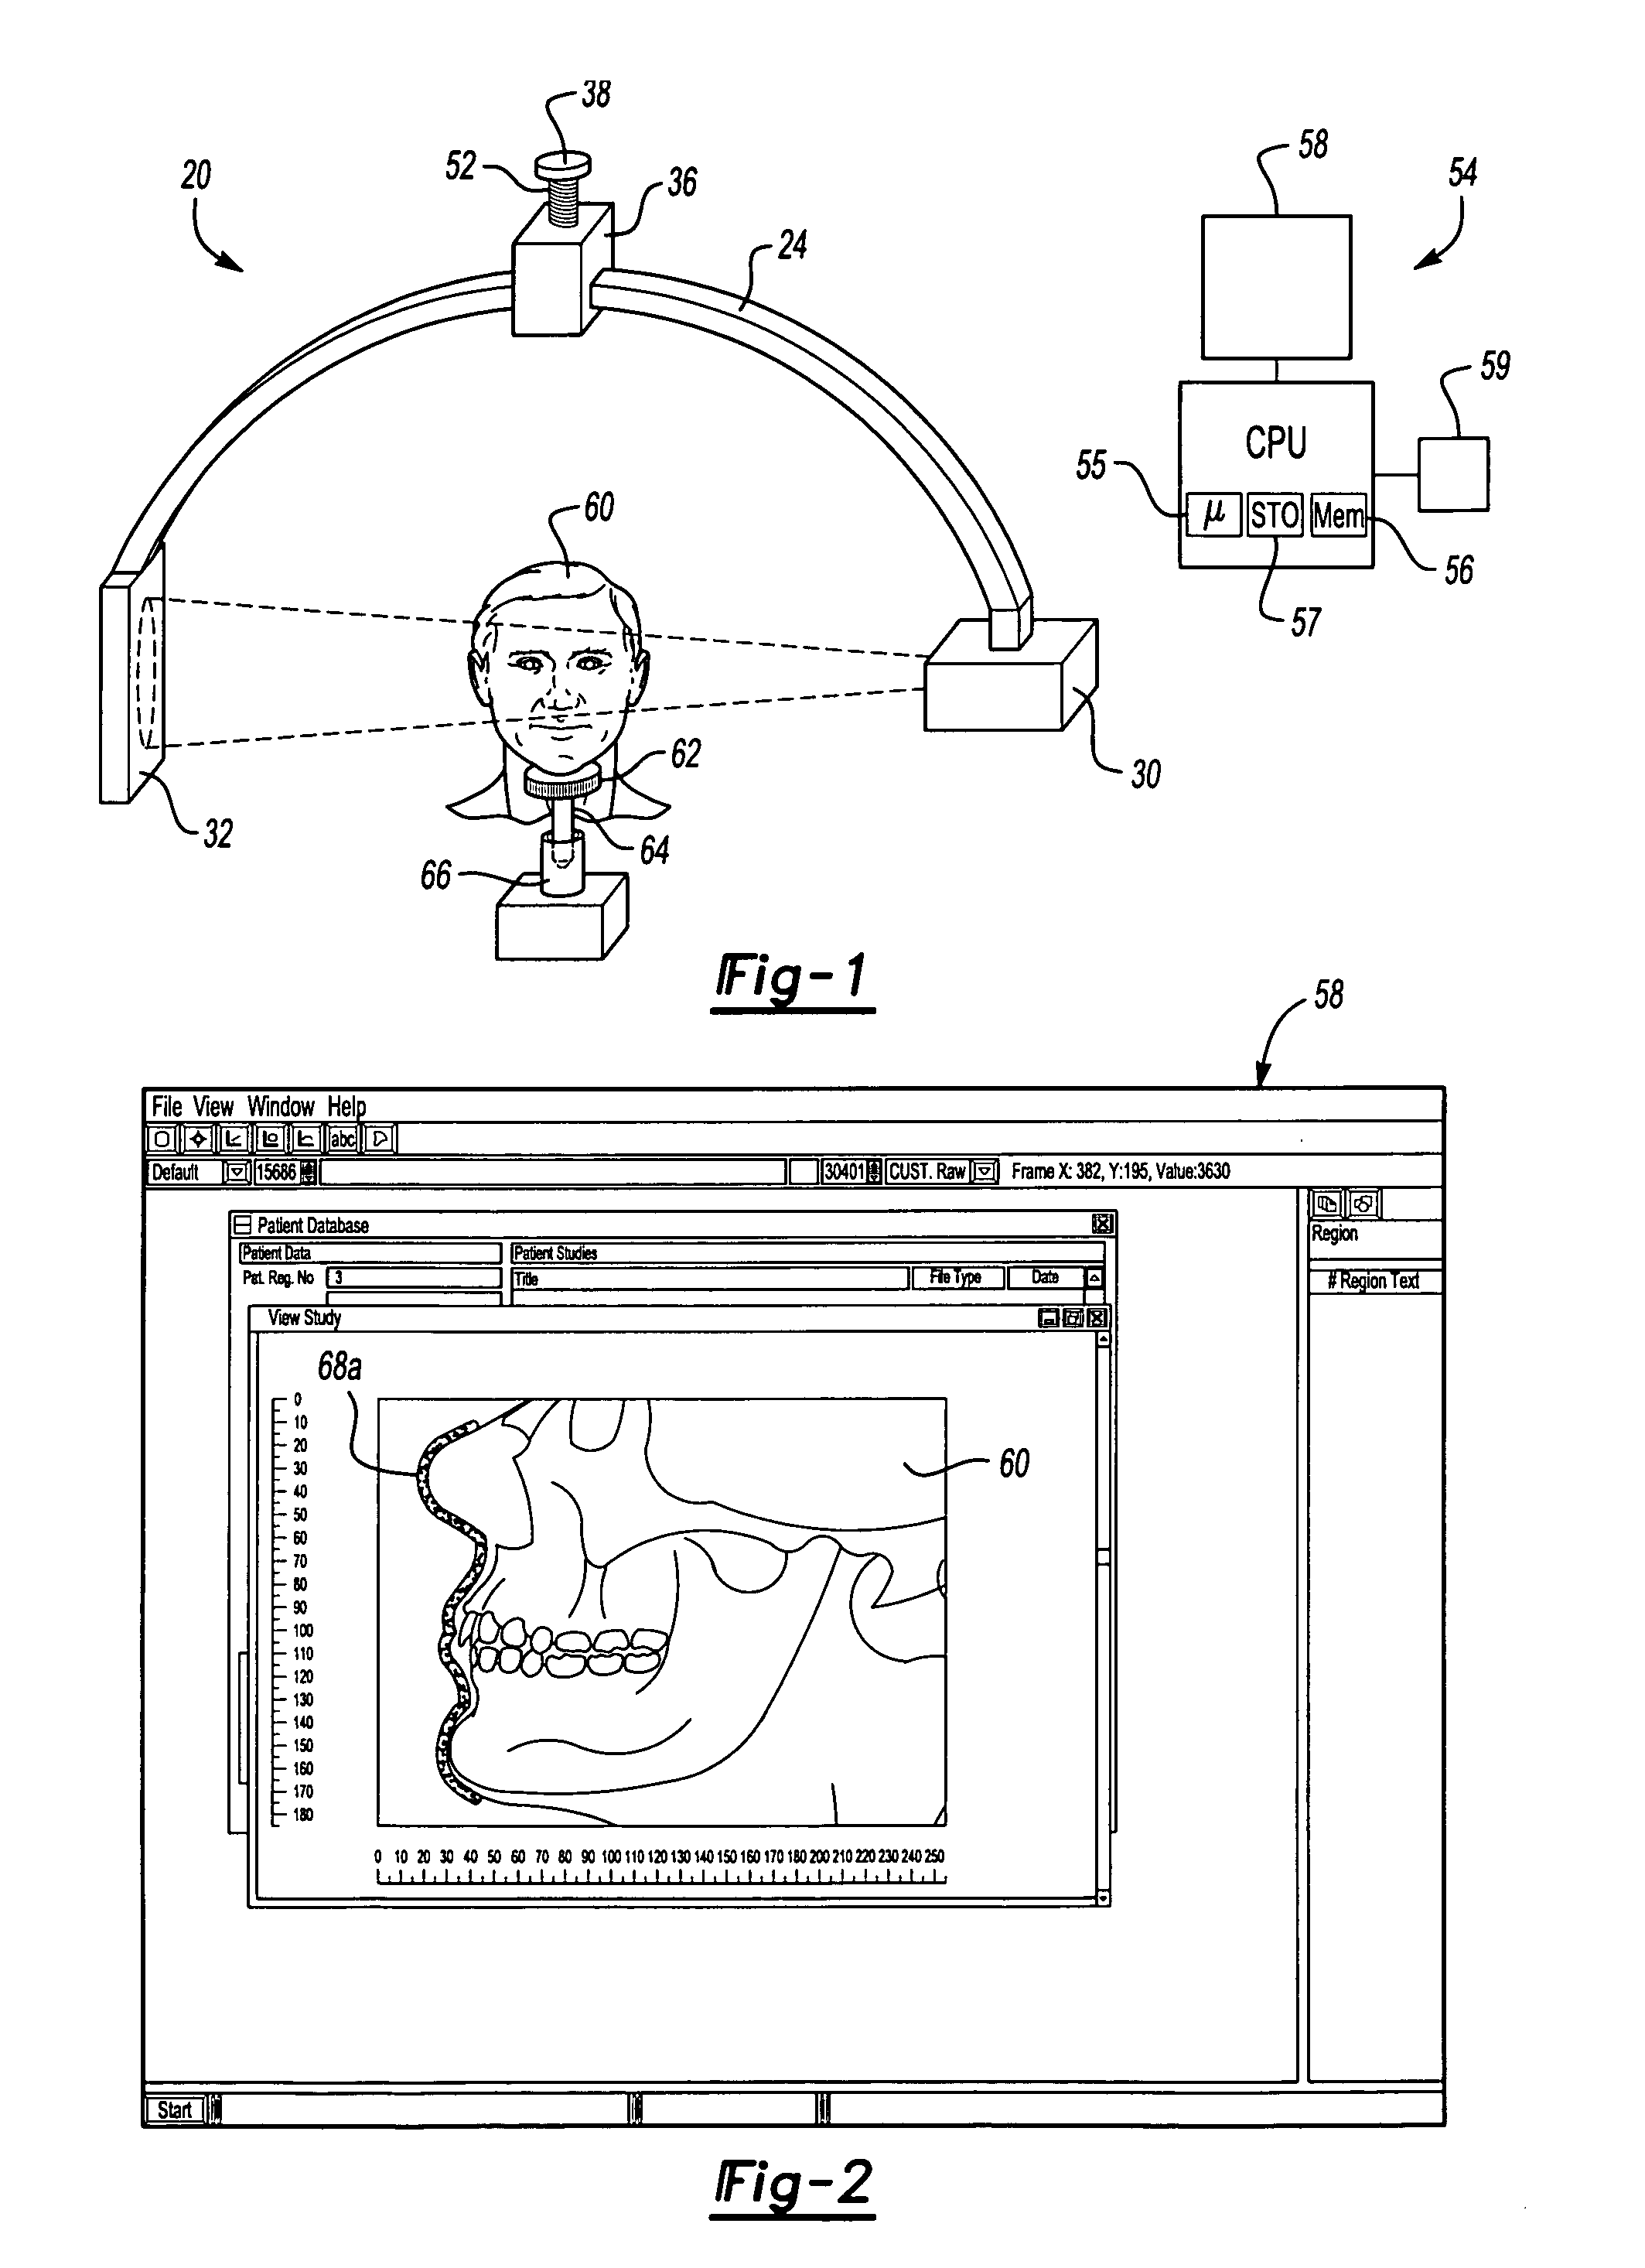 CT scanner system and method for improved positioning